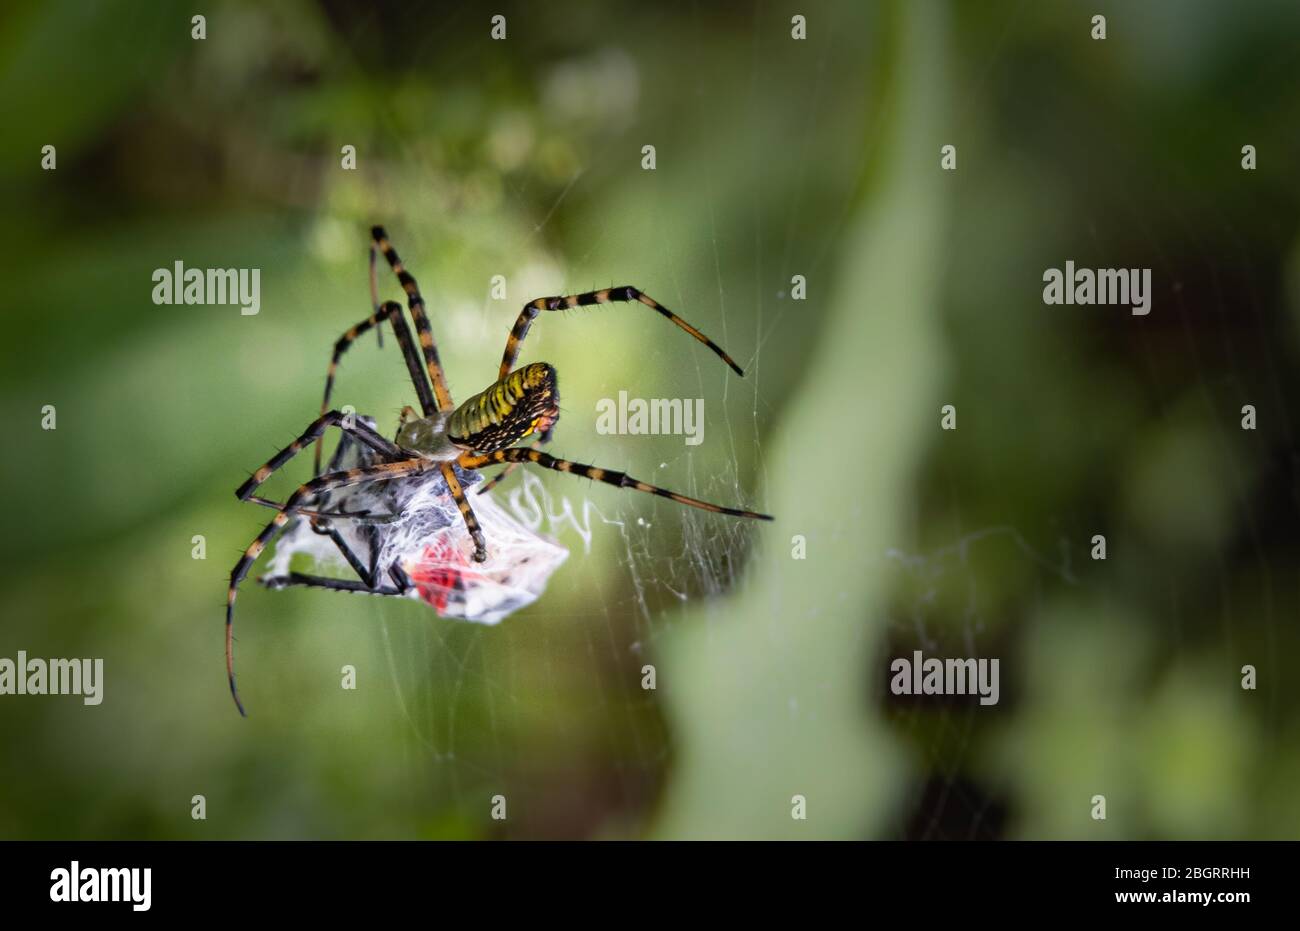 A black and yellow orb-weaver spider spins a web around its current victim - a spotted lanternfly Stock Photo